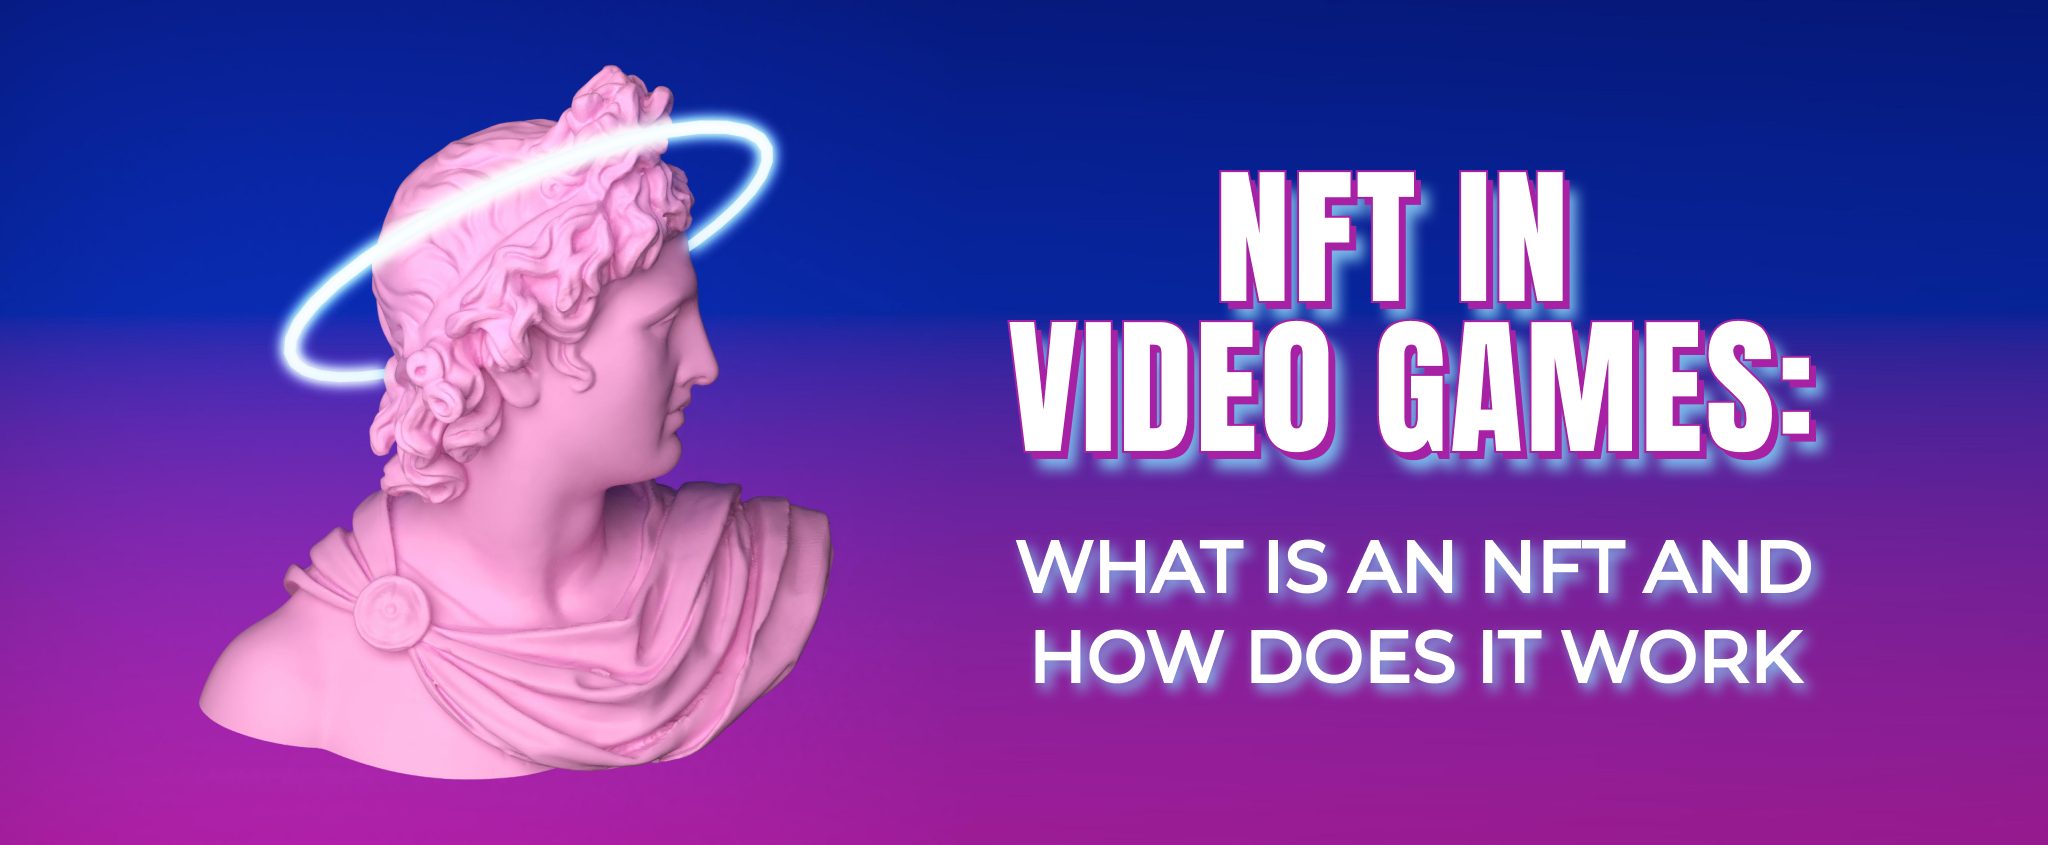 NFT in Video Games - What is an NFT and How Does It Work